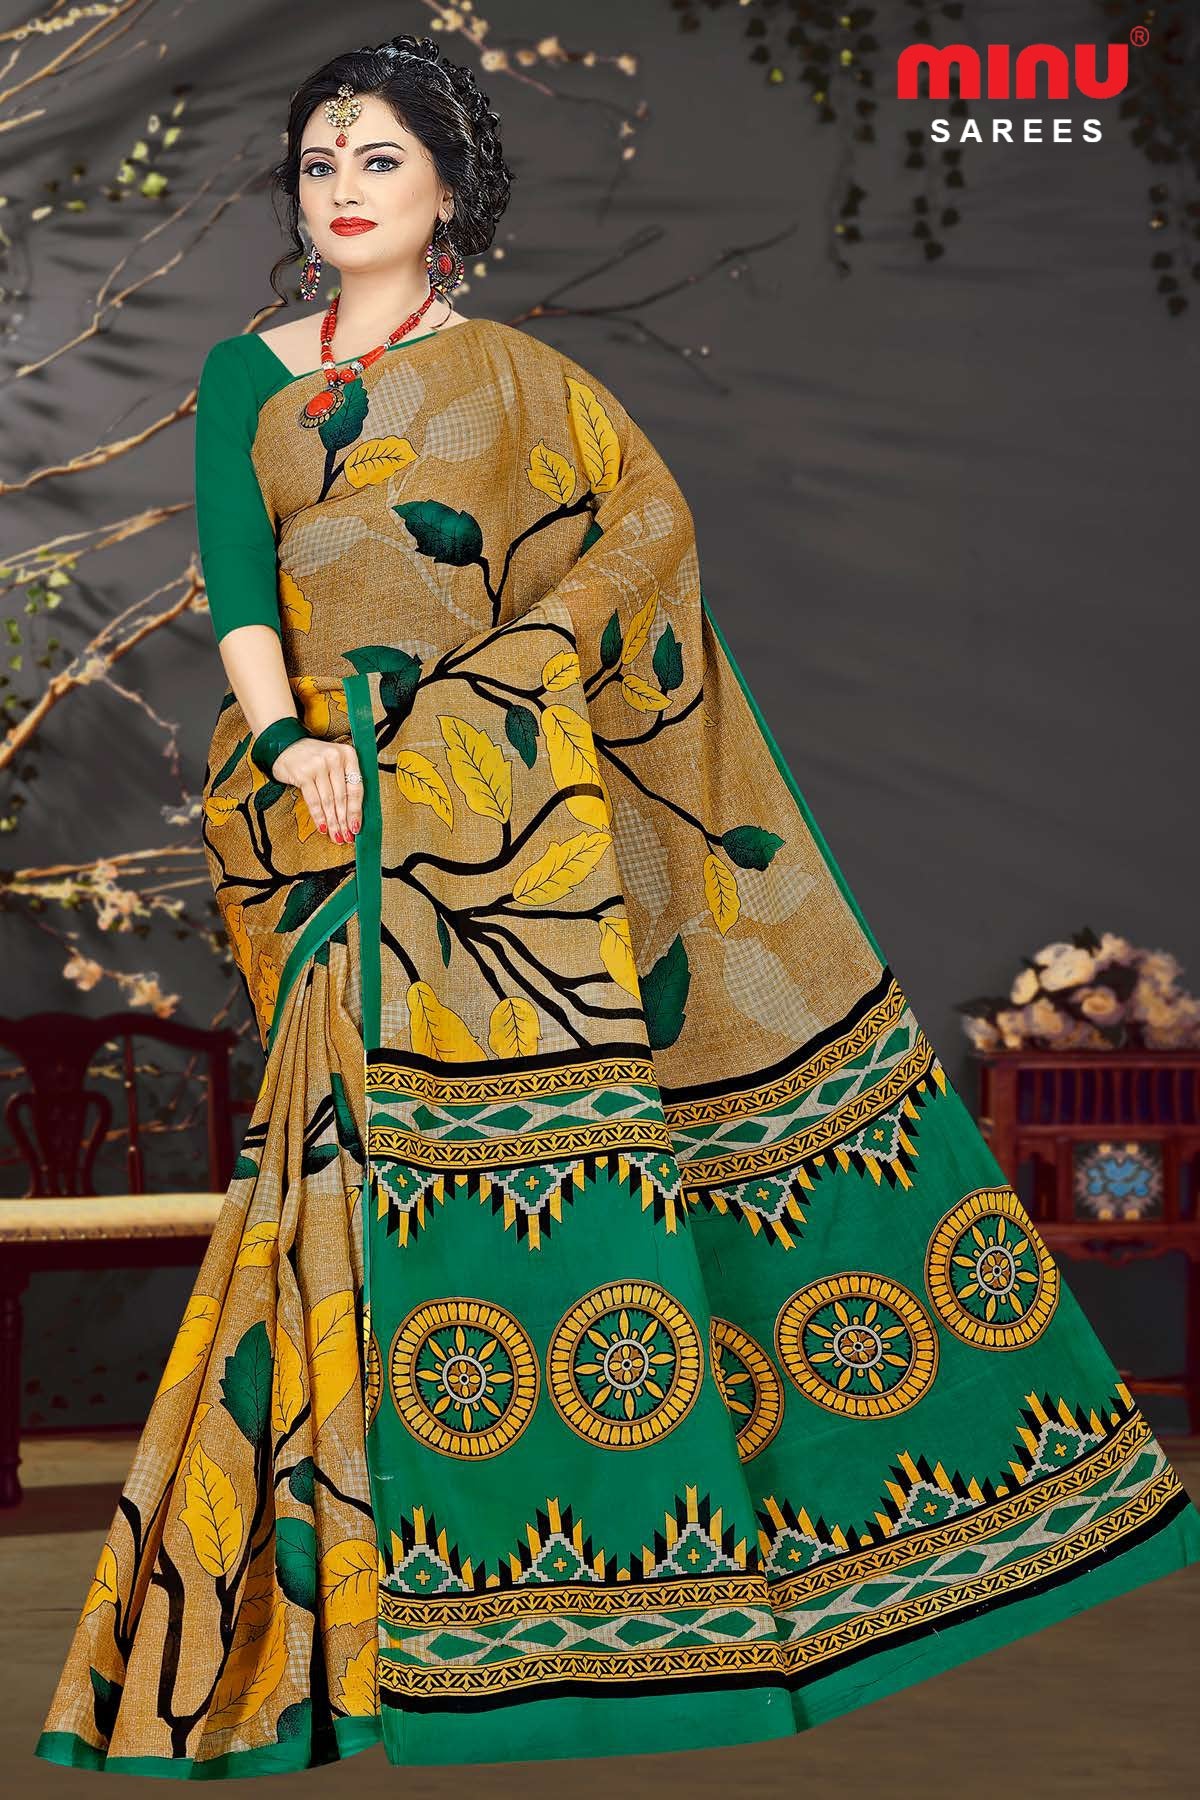 Women wearing color printed saree with best view 